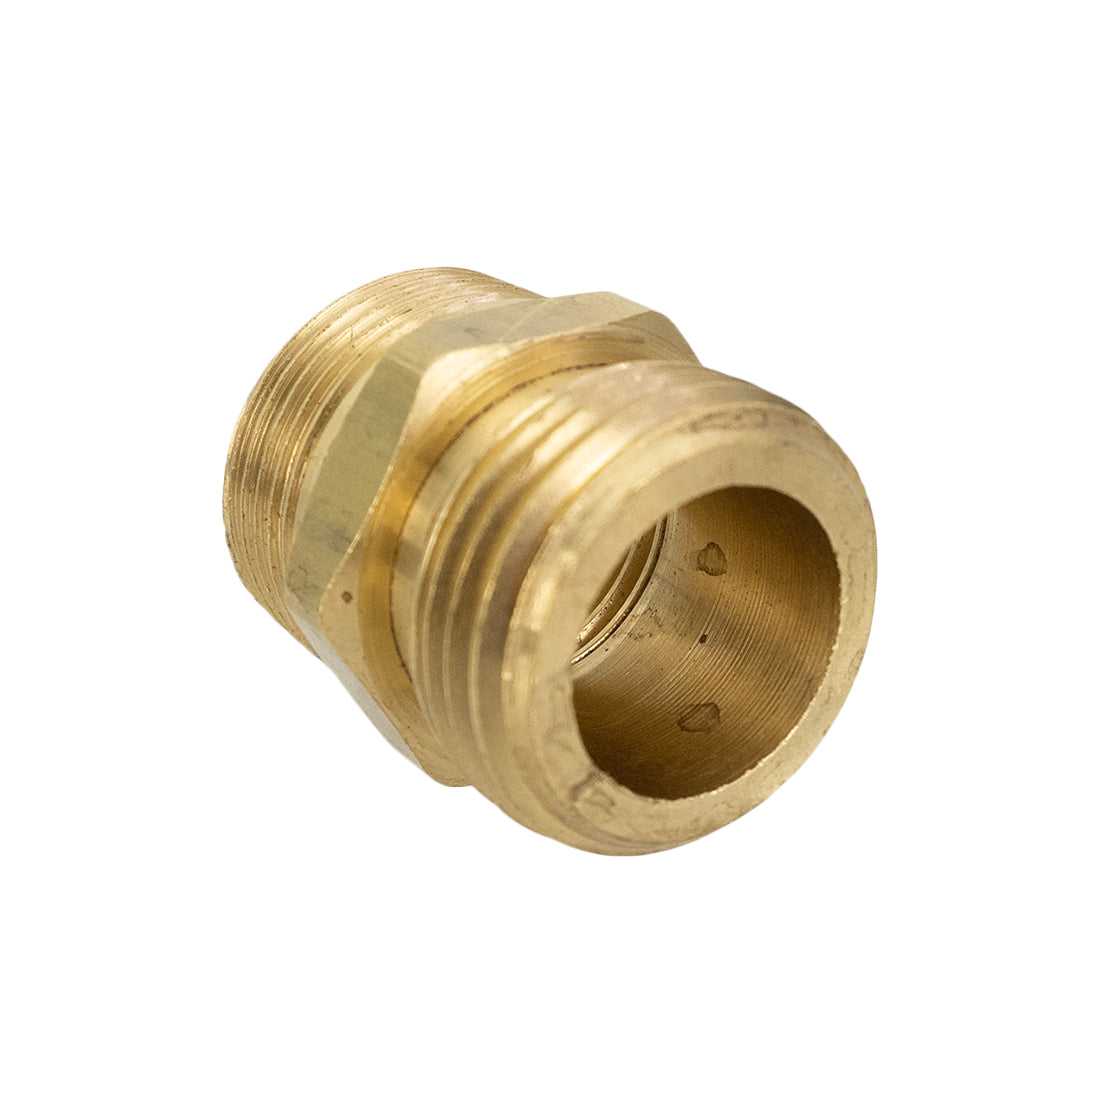 PWP Brass Fitting - Garden Hose Female x 3/4 Male NPT Top View